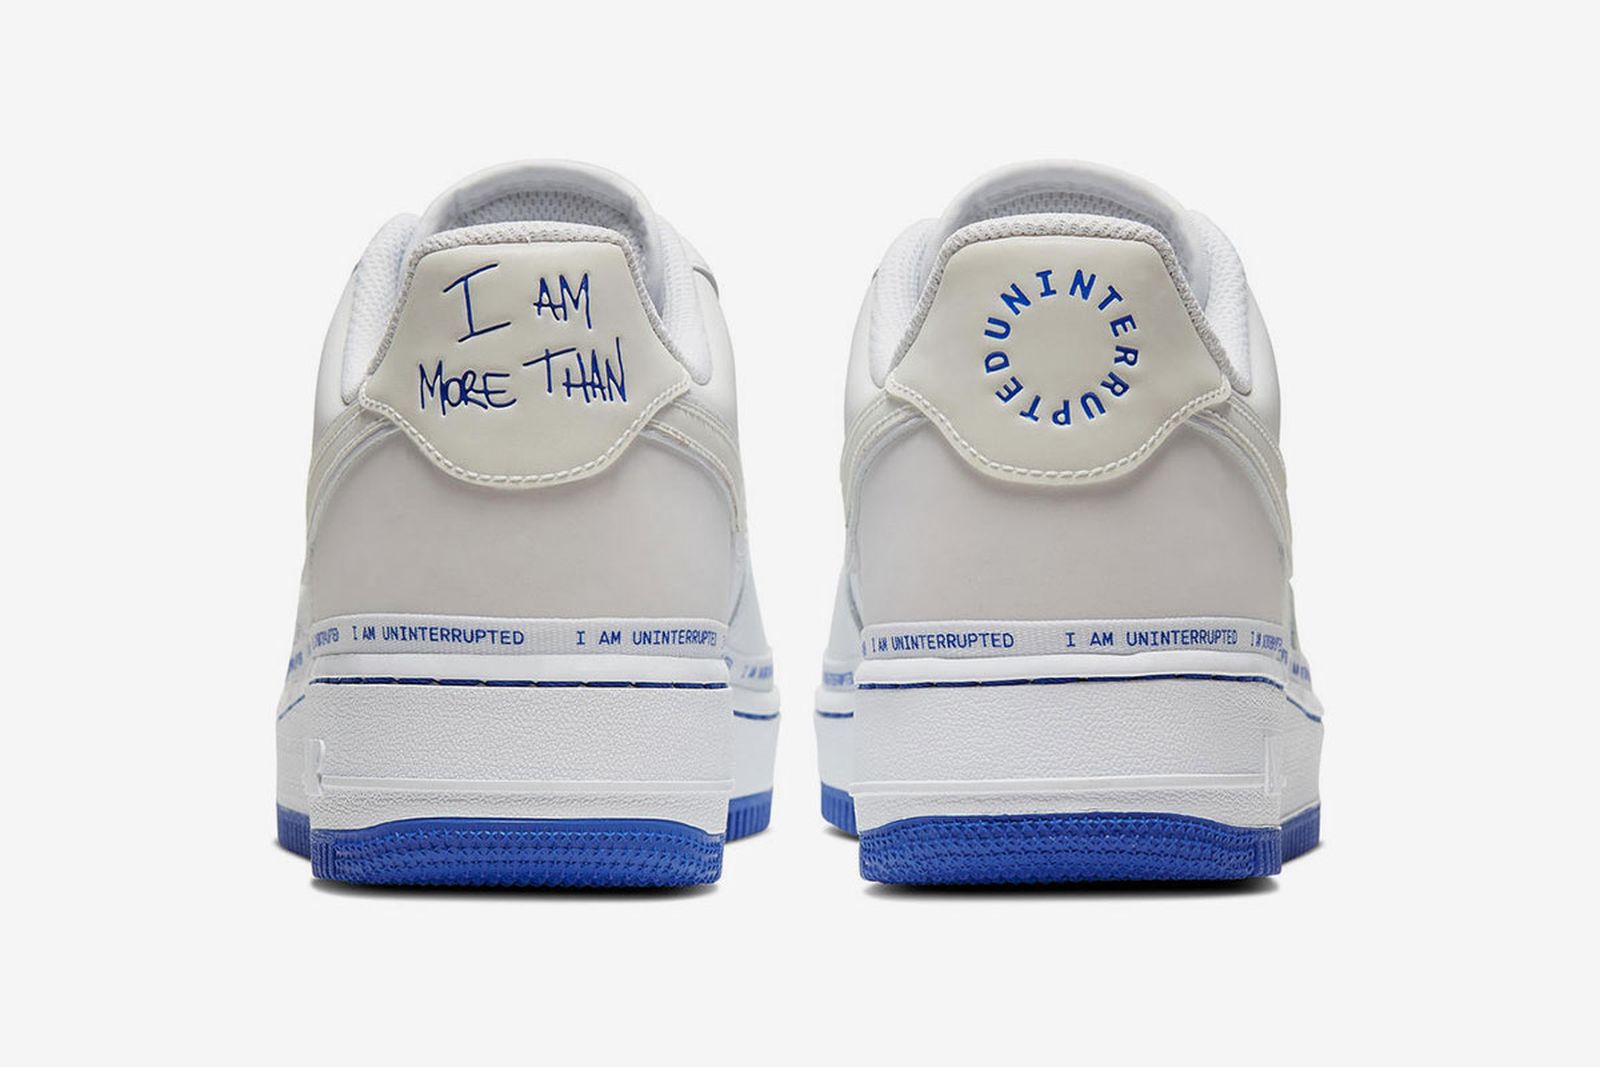 LeBron's Uninterrupted Nike AF1 Collab Is All About Customization جهاز التبويض